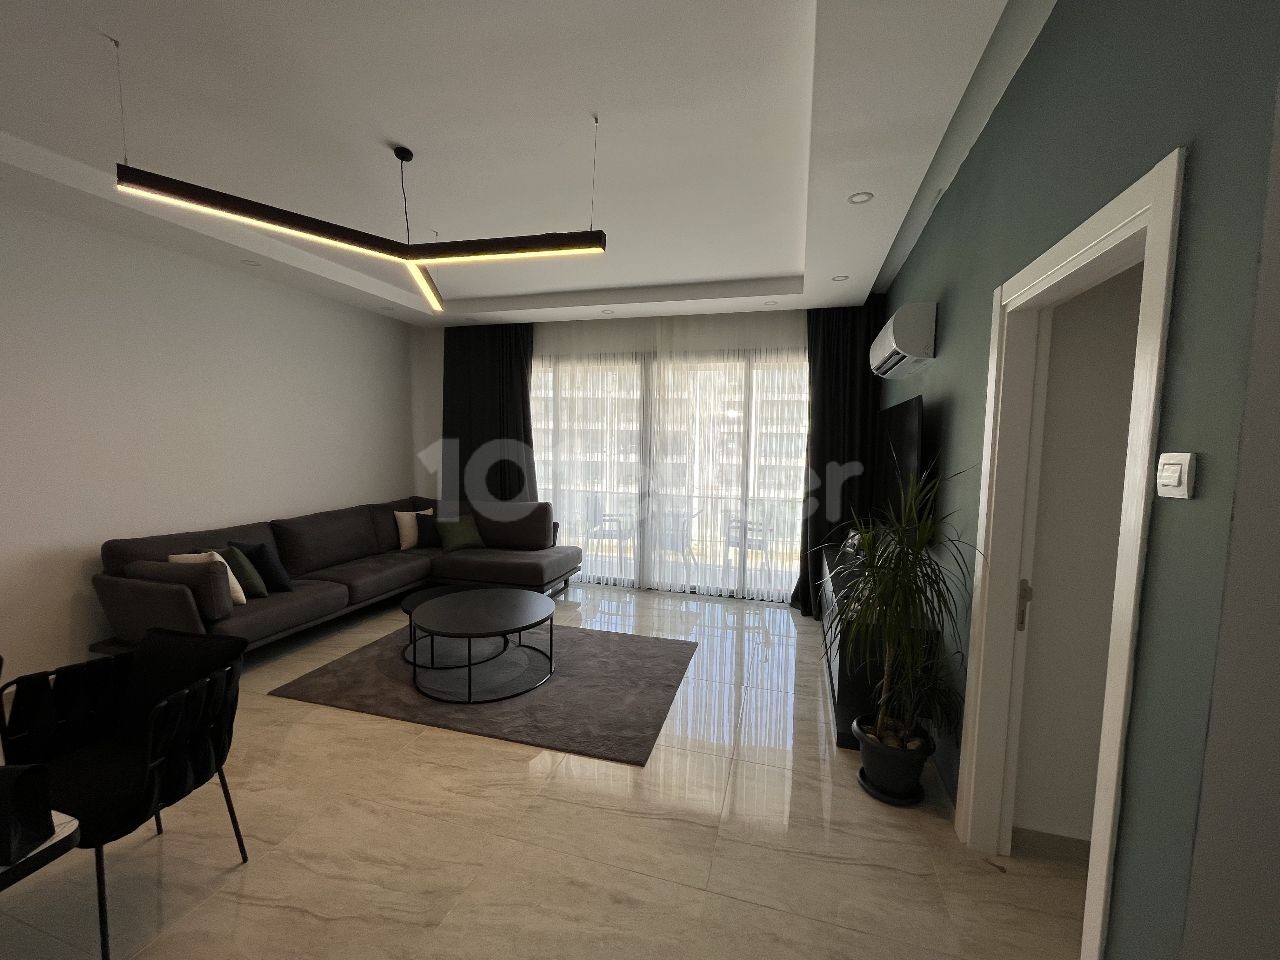 Güzelyurt Kalkanlı 2+1 flat for sale from the real estate agent of the site